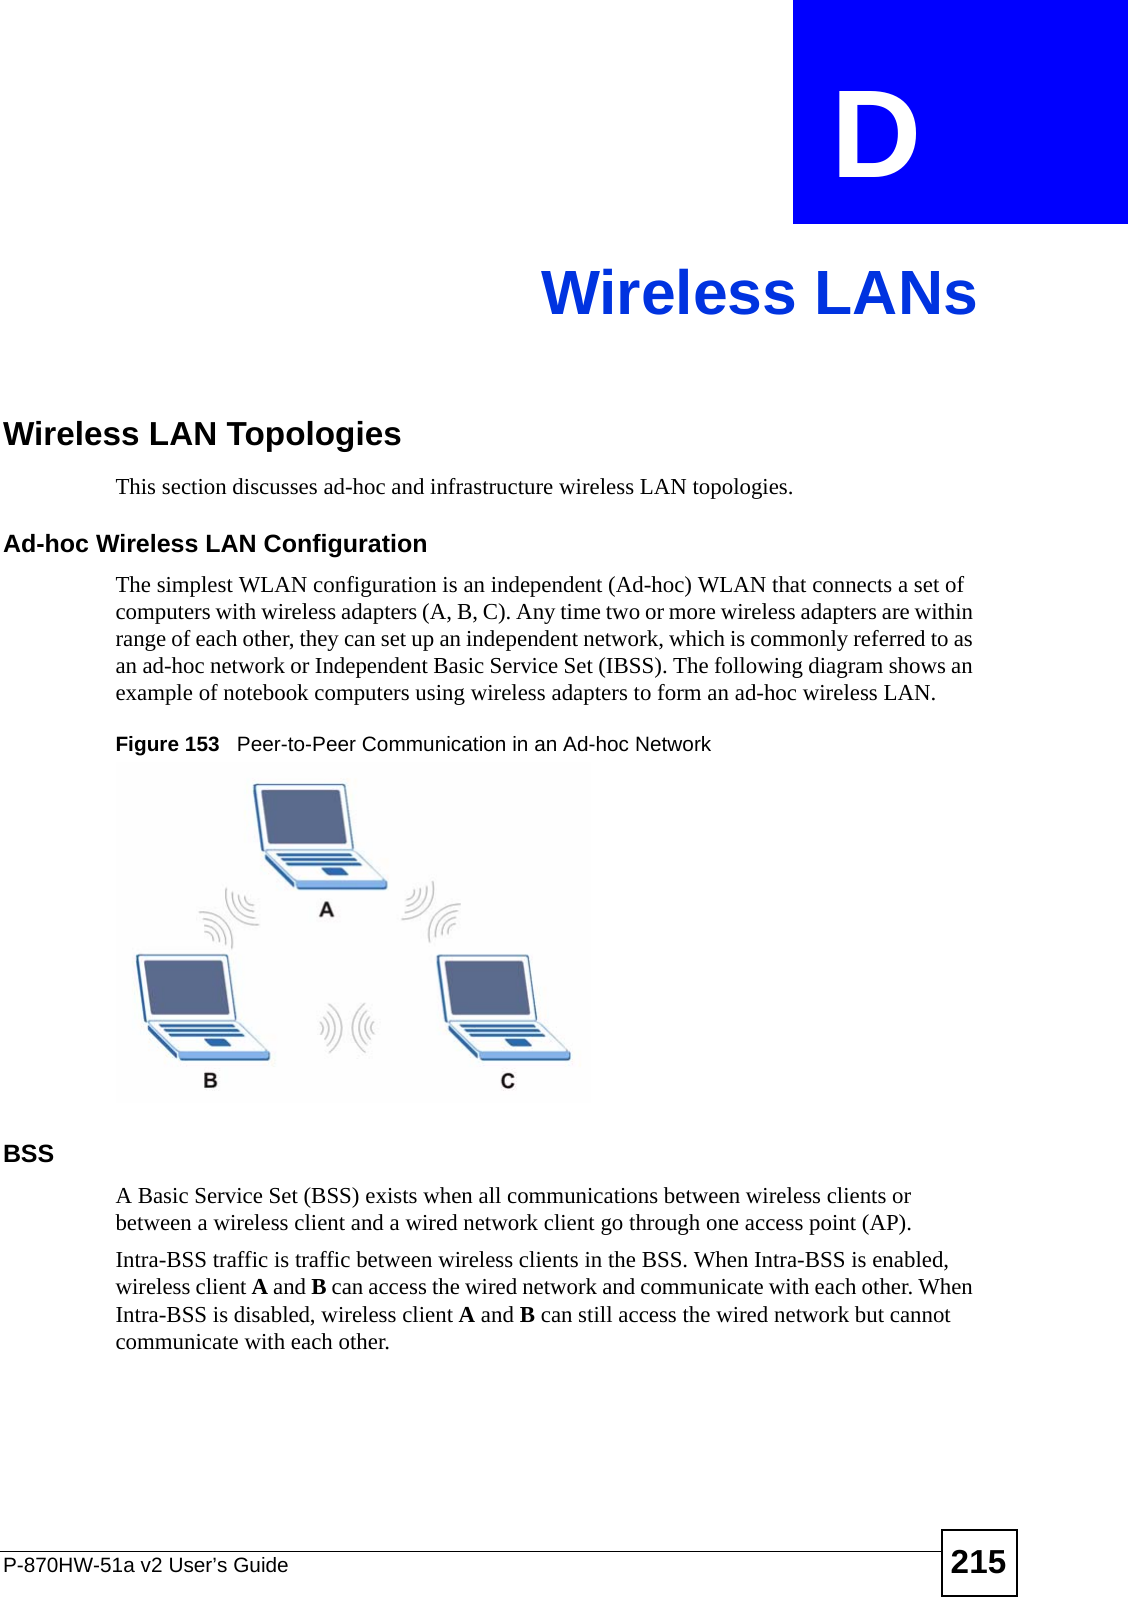 P-870HW-51a v2 User’s Guide 215APPENDIX  D Wireless LANsWireless LAN TopologiesThis section discusses ad-hoc and infrastructure wireless LAN topologies.Ad-hoc Wireless LAN ConfigurationThe simplest WLAN configuration is an independent (Ad-hoc) WLAN that connects a set of computers with wireless adapters (A, B, C). Any time two or more wireless adapters are within range of each other, they can set up an independent network, which is commonly referred to as an ad-hoc network or Independent Basic Service Set (IBSS). The following diagram shows an example of notebook computers using wireless adapters to form an ad-hoc wireless LAN. Figure 153   Peer-to-Peer Communication in an Ad-hoc NetworkBSSA Basic Service Set (BSS) exists when all communications between wireless clients or between a wireless client and a wired network client go through one access point (AP). Intra-BSS traffic is traffic between wireless clients in the BSS. When Intra-BSS is enabled, wireless client A and B can access the wired network and communicate with each other. When Intra-BSS is disabled, wireless client A and B can still access the wired network but cannot communicate with each other.